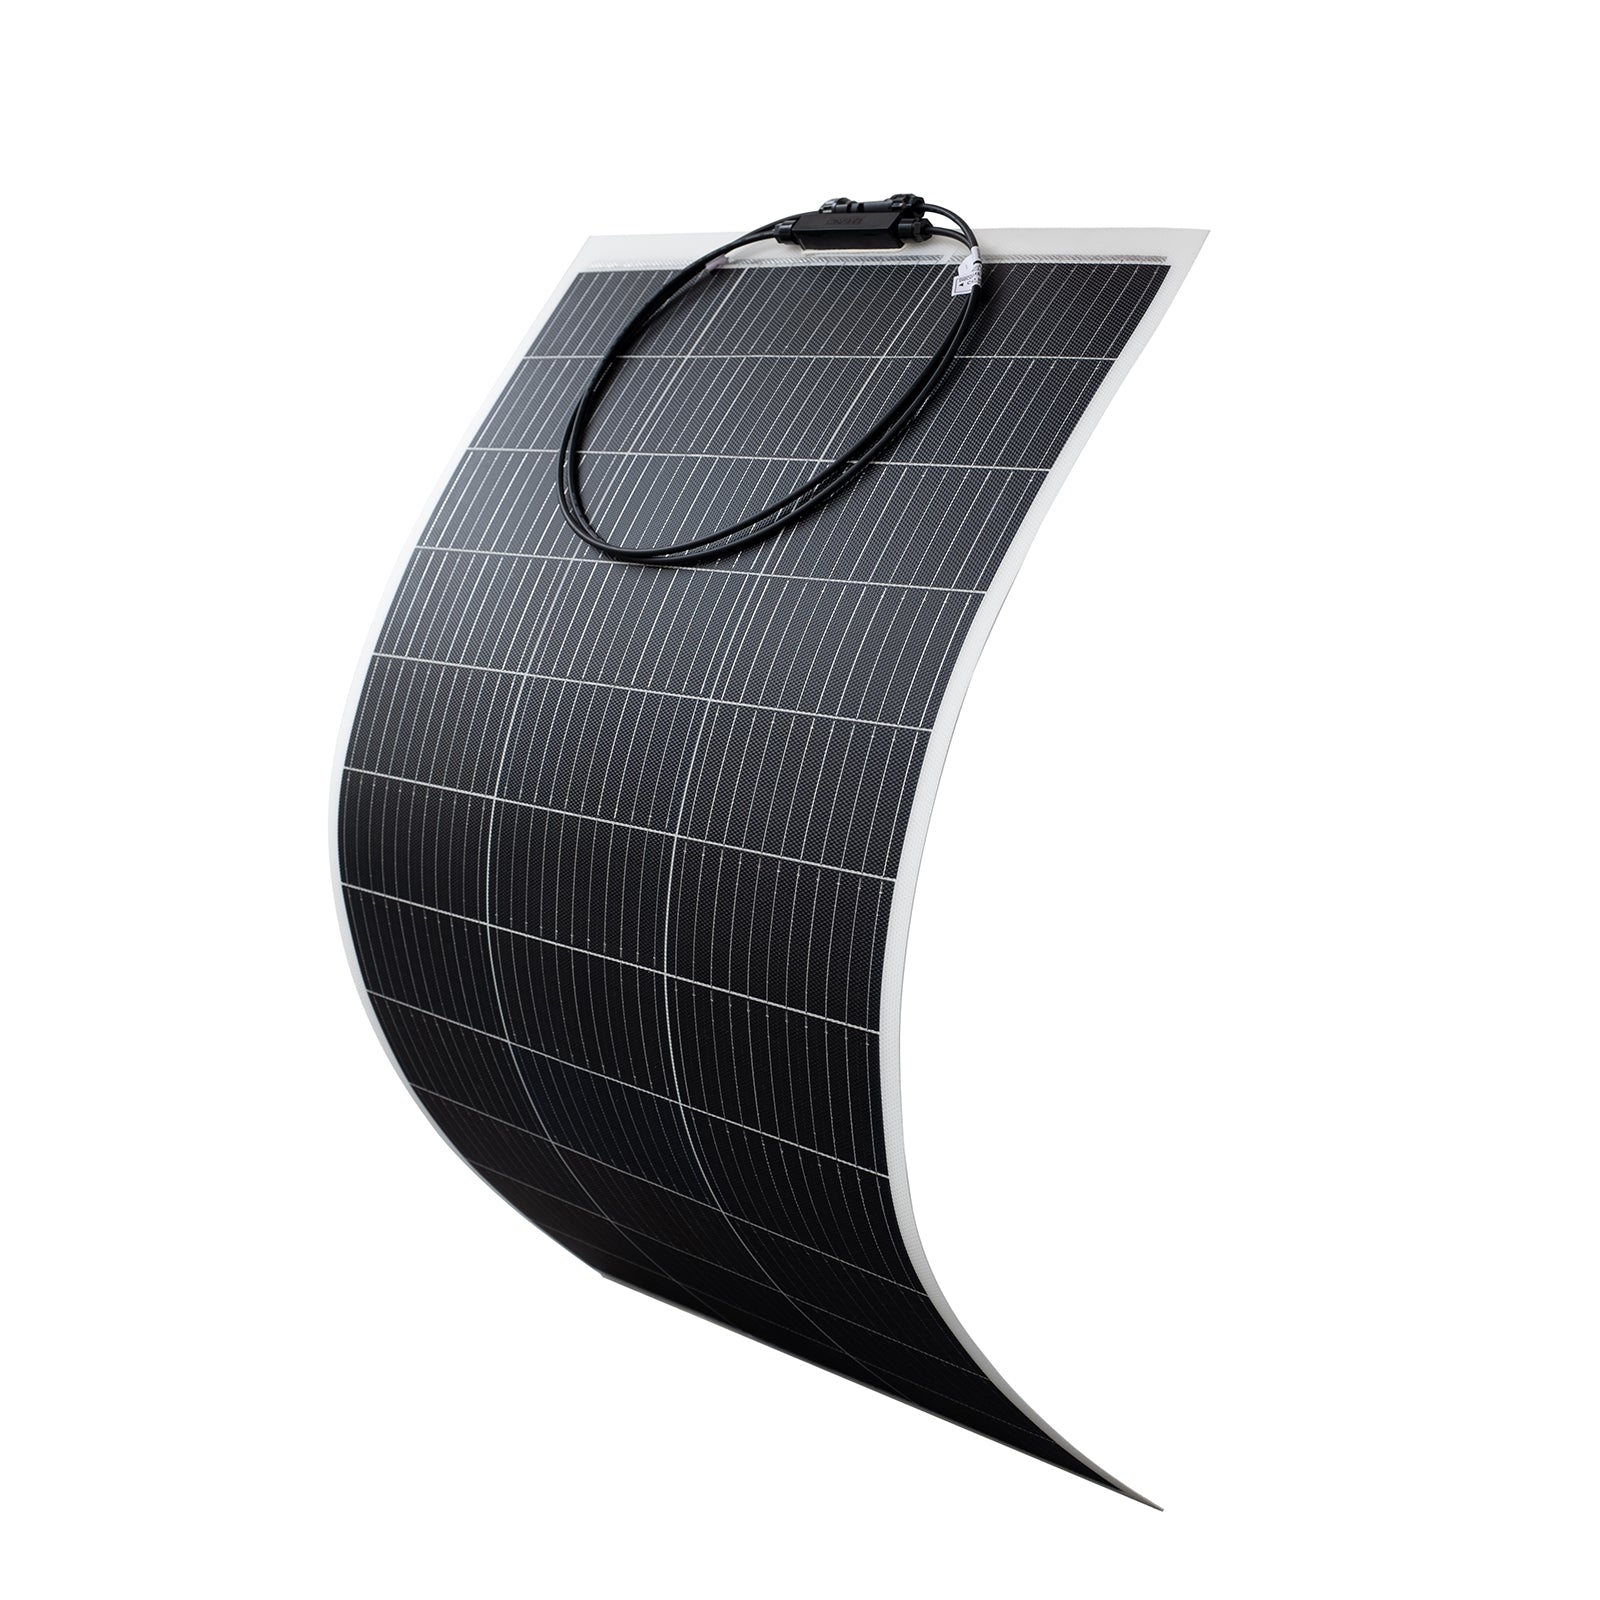 What are Flexible Solar Panels?